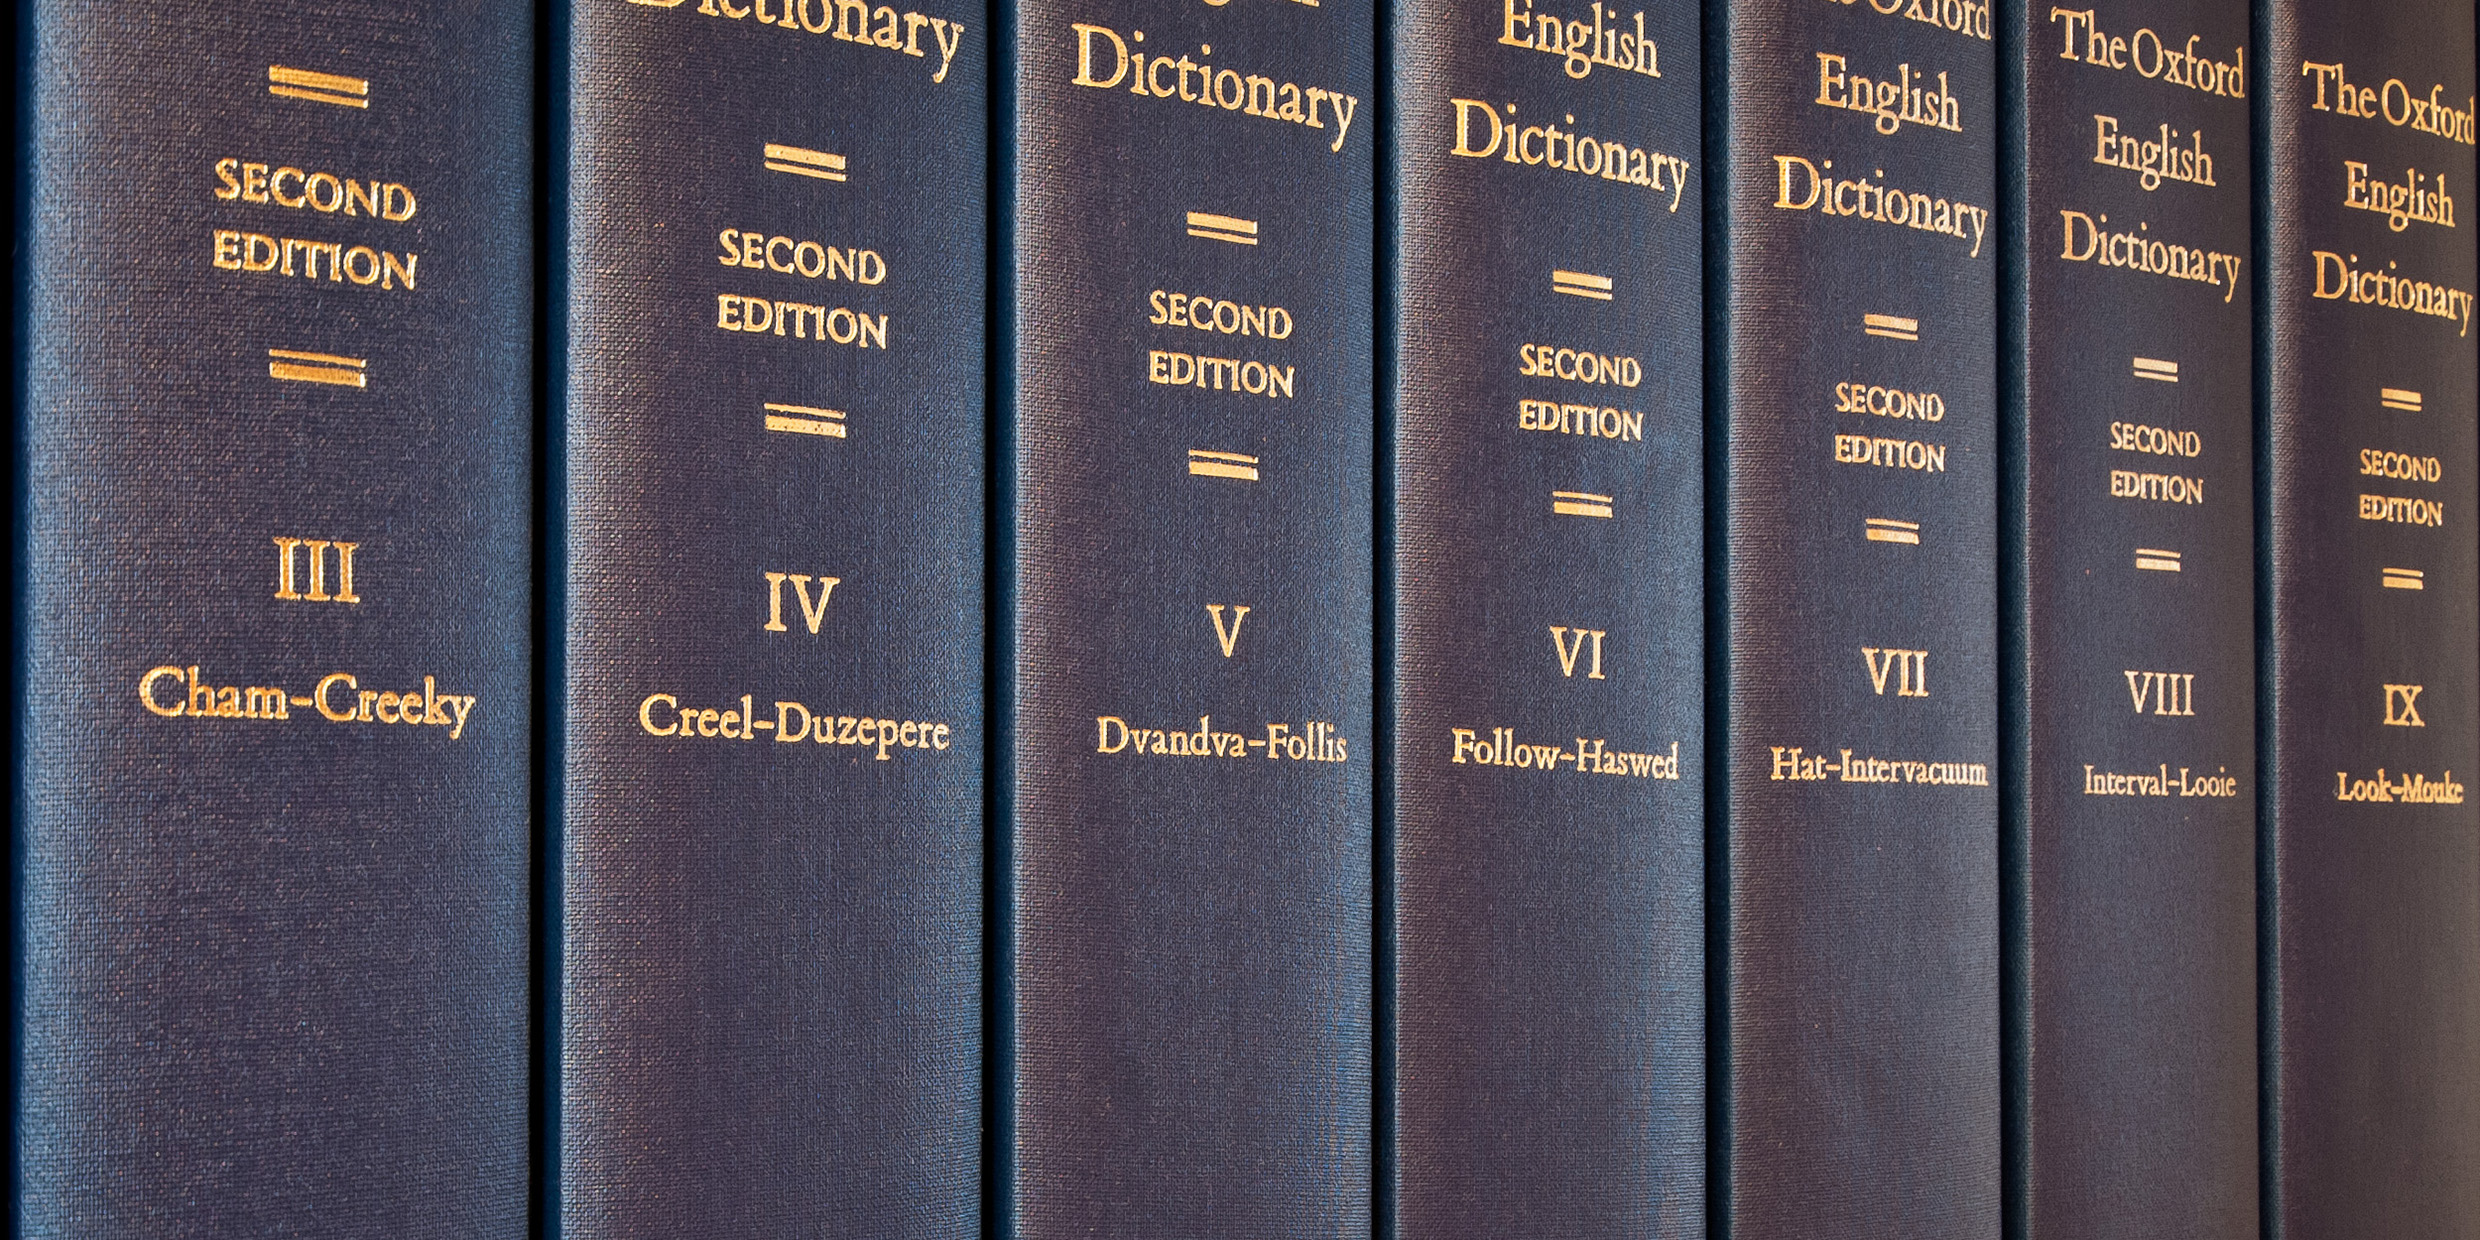 Image of dictionary volumes